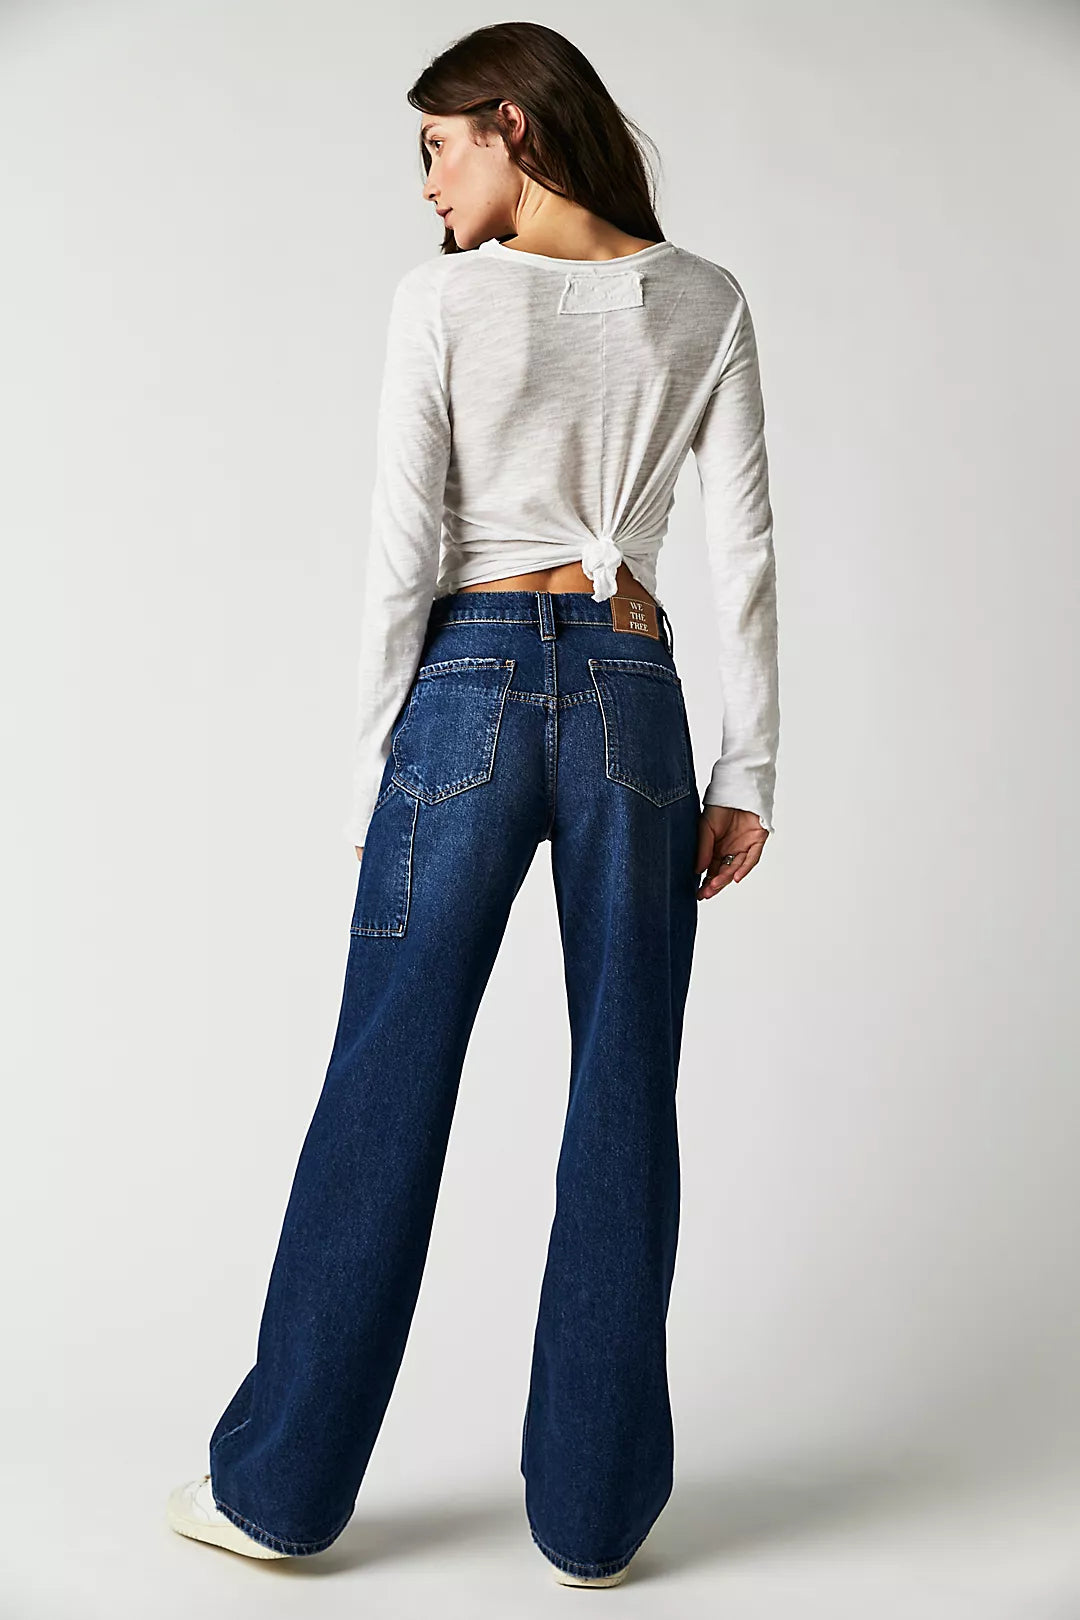 Free People We The Free Tinsley Baggy High-Rise Jeans Dark Romance